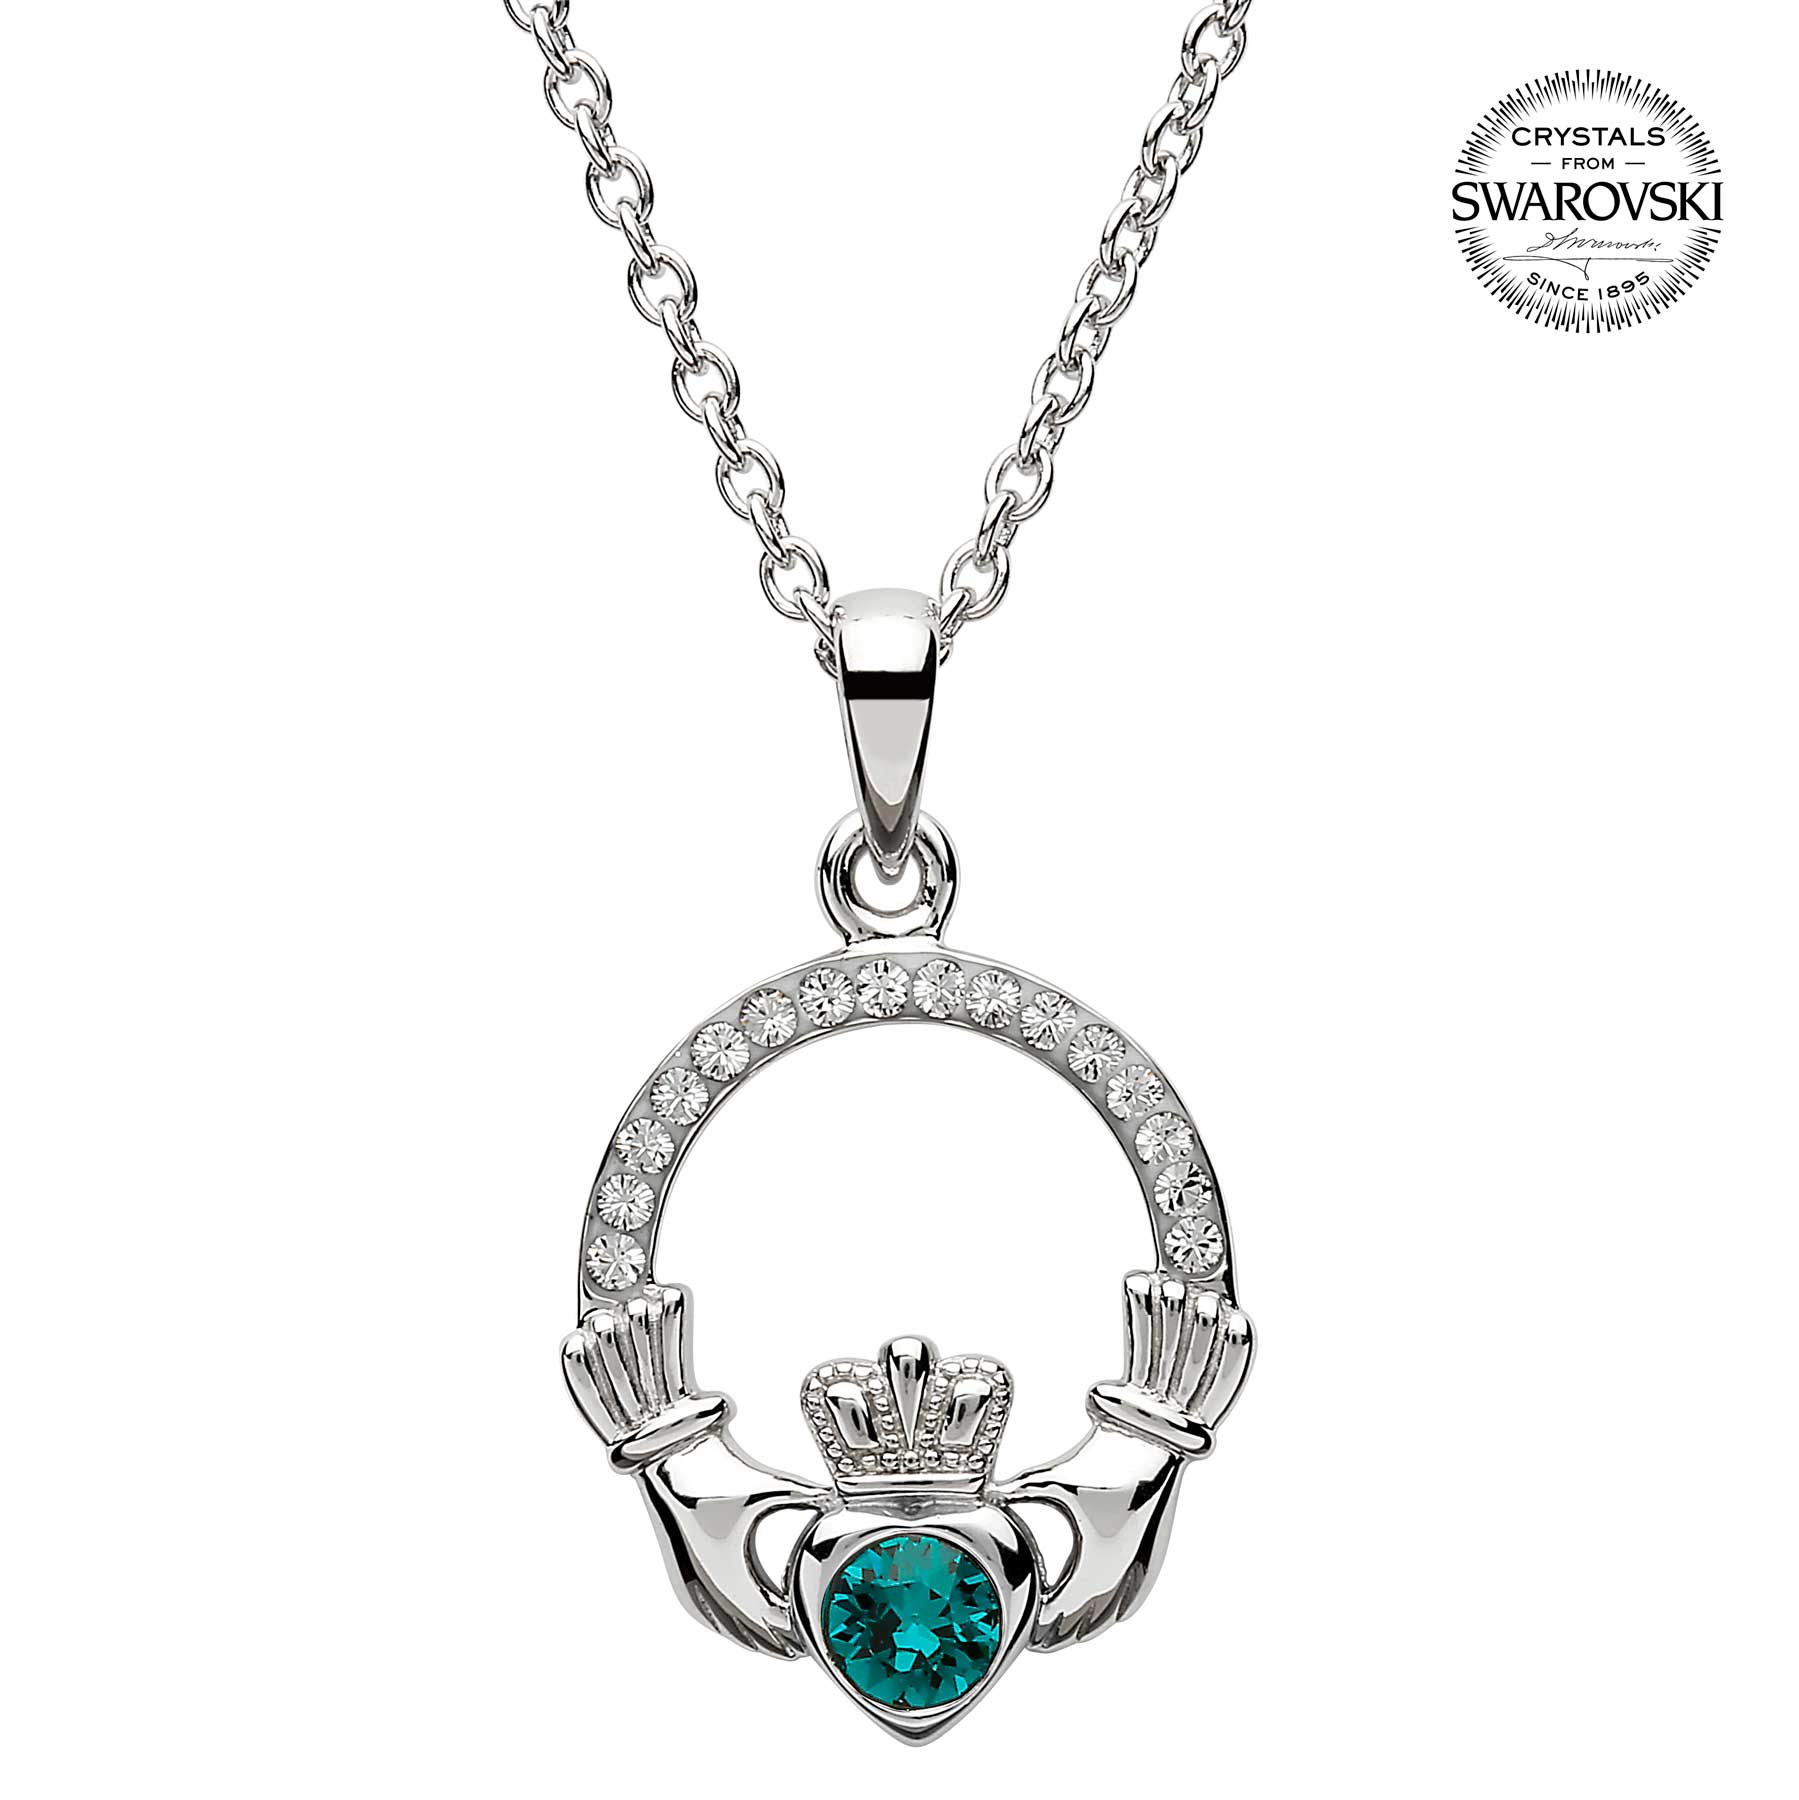 Product image for Irish Necklace | Sterling Silver Claddagh Swarovski Crystal Birthstone Pendant